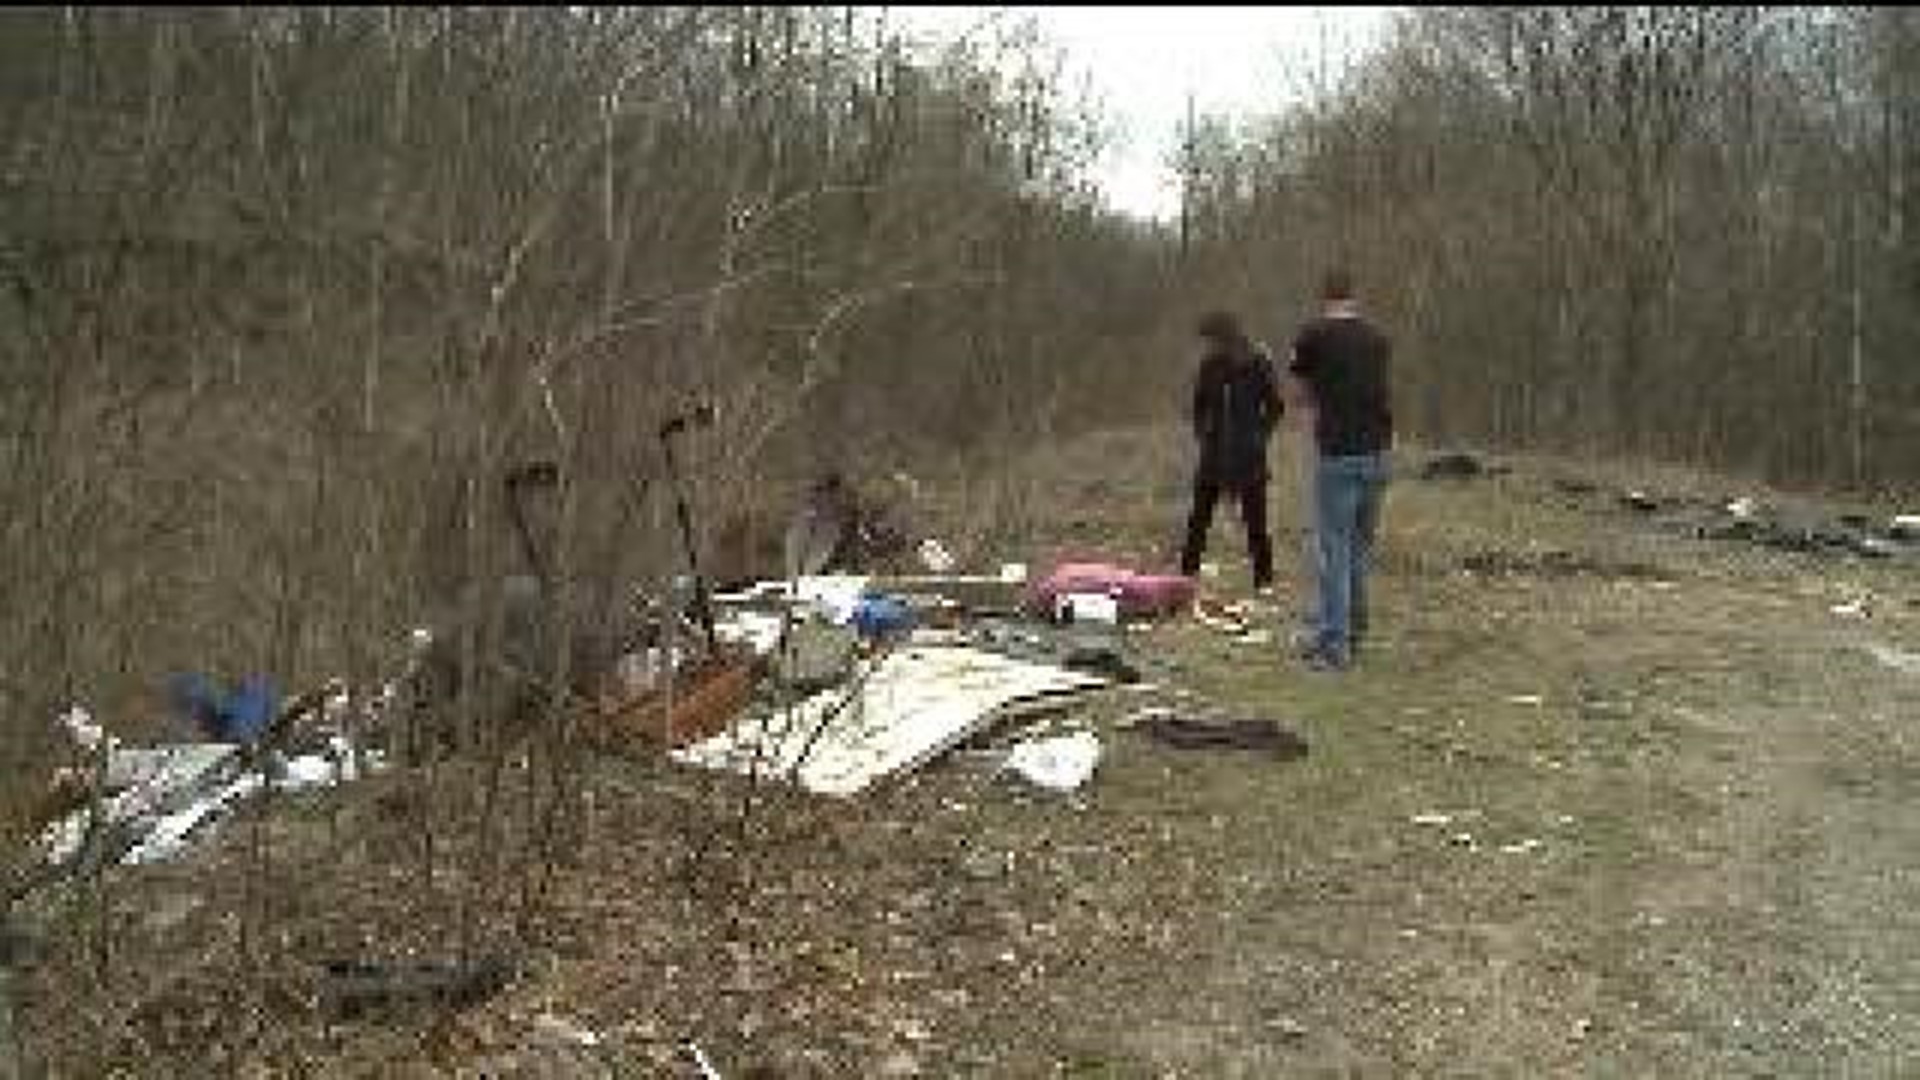 Tamaqua Council Member Wants Trail Cleaned Up